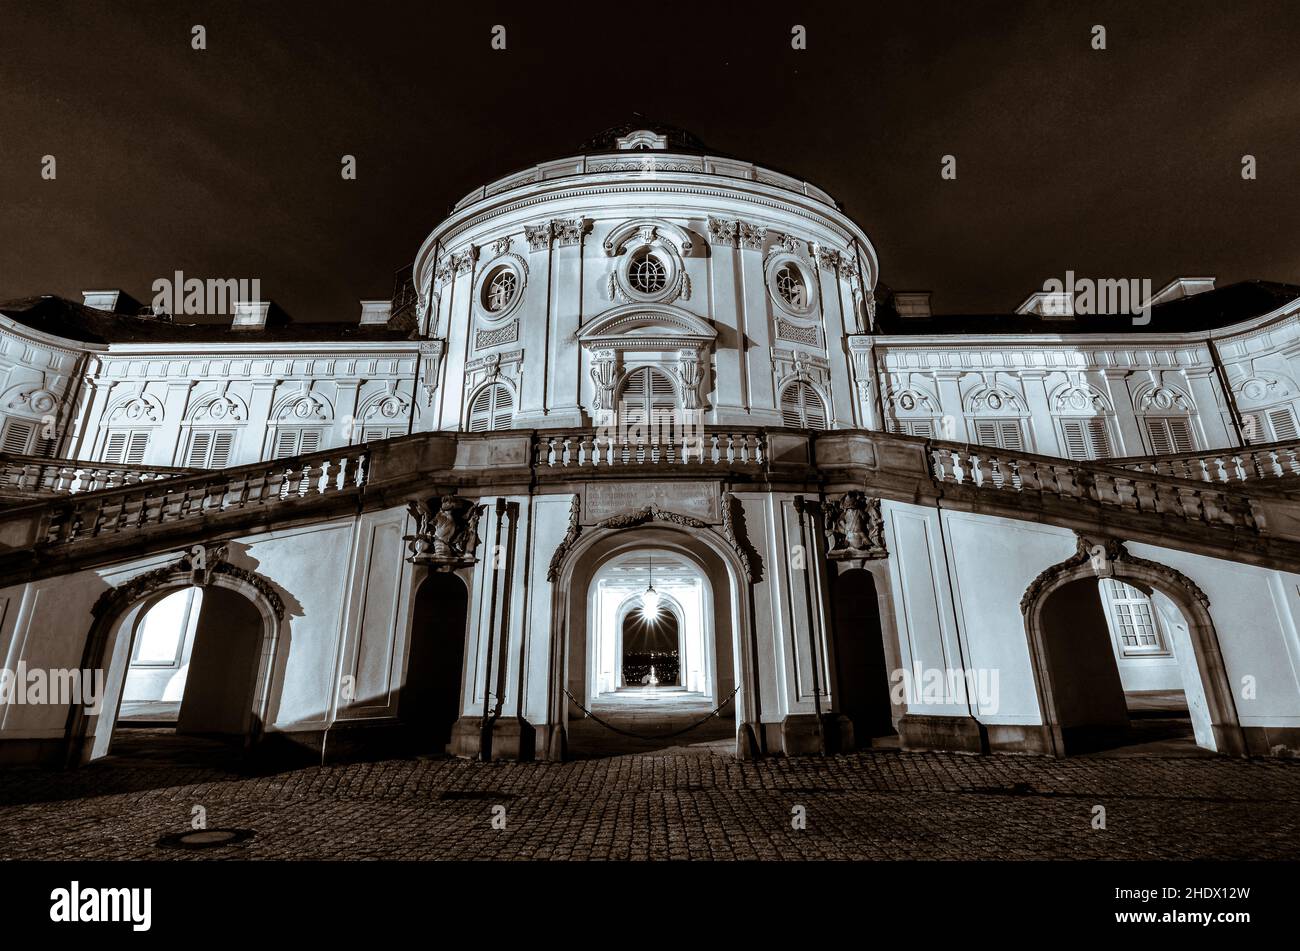 Facade of Solitude Palace in Stuttgart, Germany at night Stock Photo